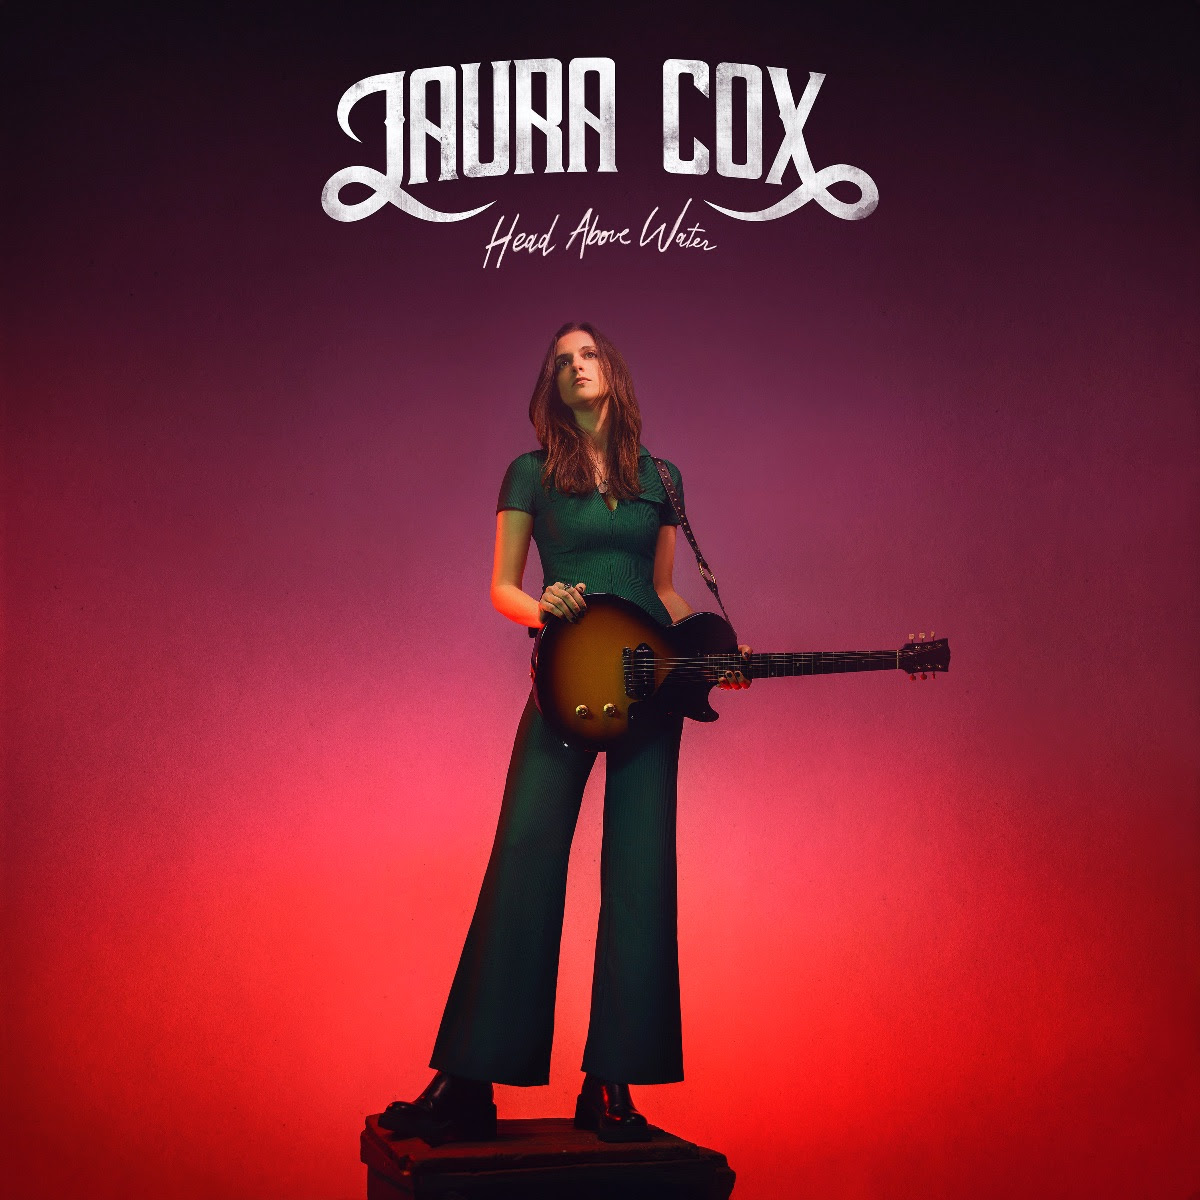 Guitarist Laura Cox Drops "Wiser" Video — New Album "Head Above Water" Out 1/20🎸